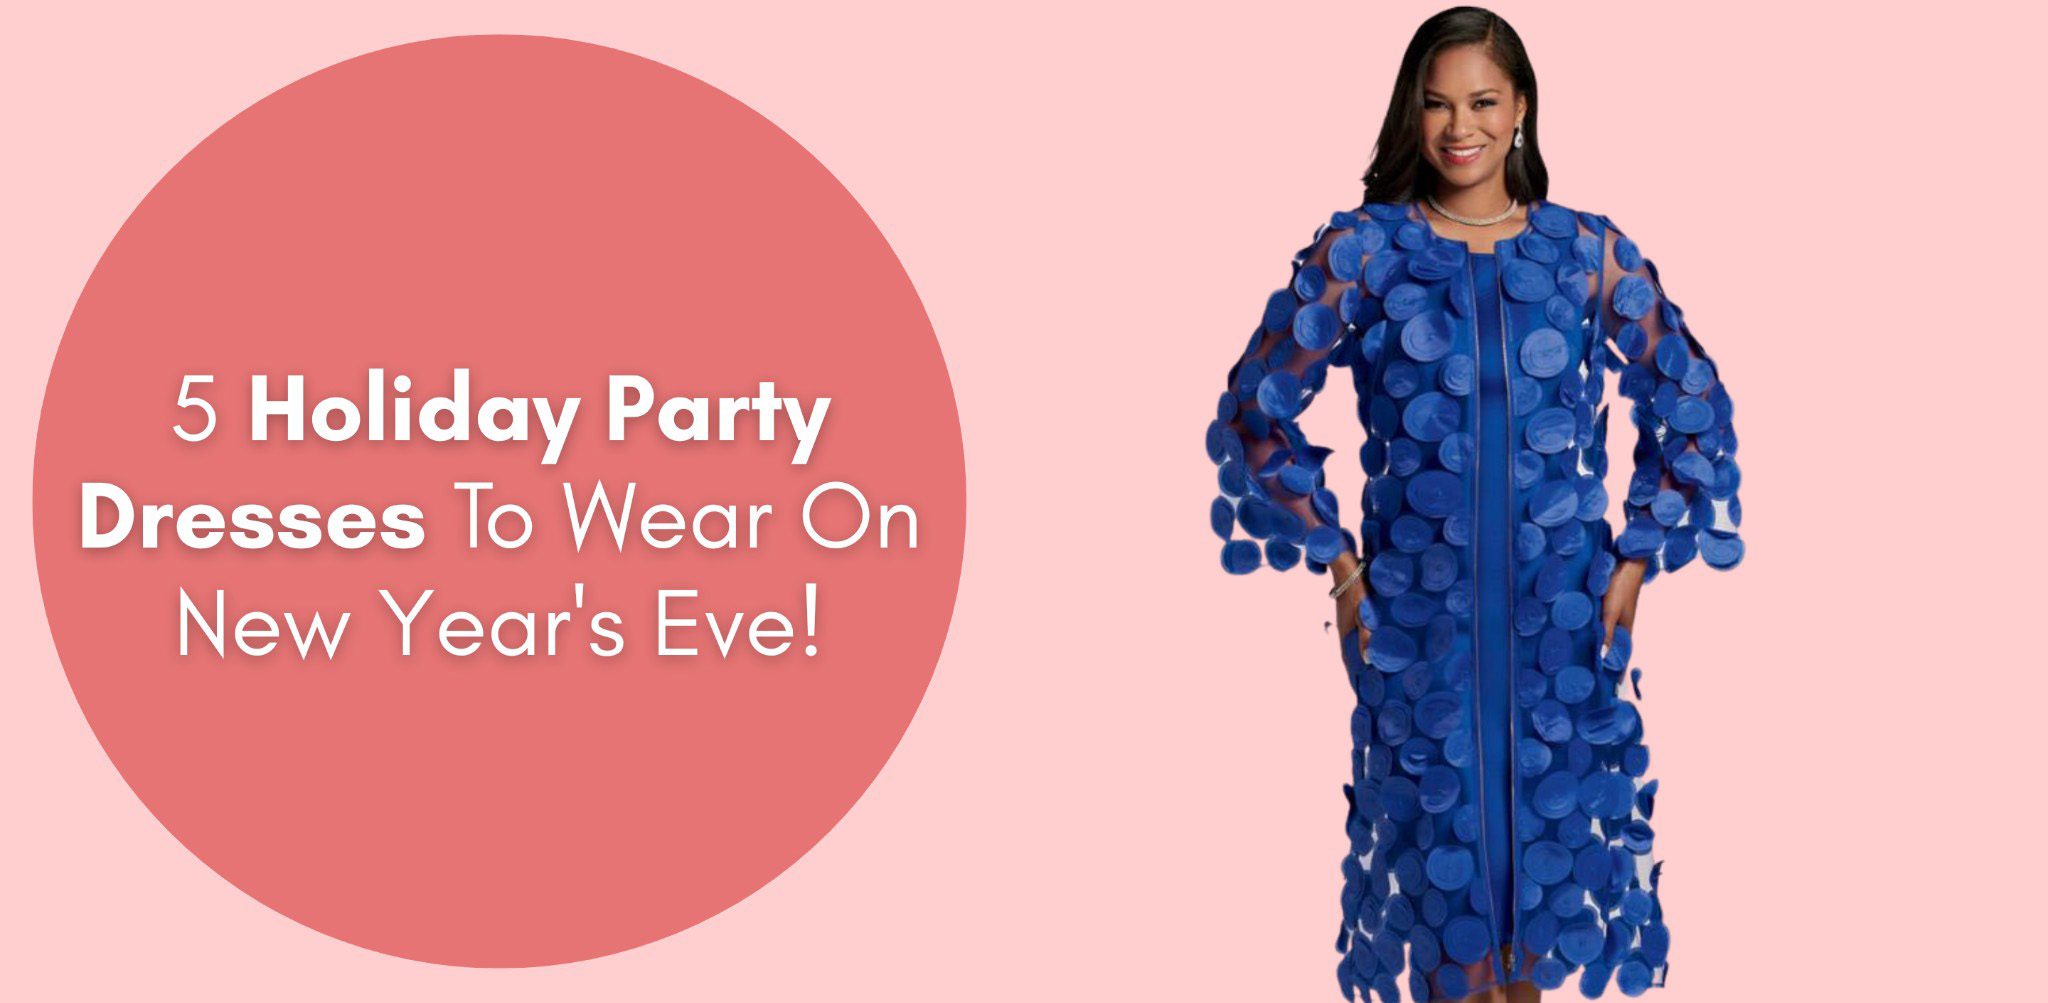 5 holiday party dresses to wear on NYE